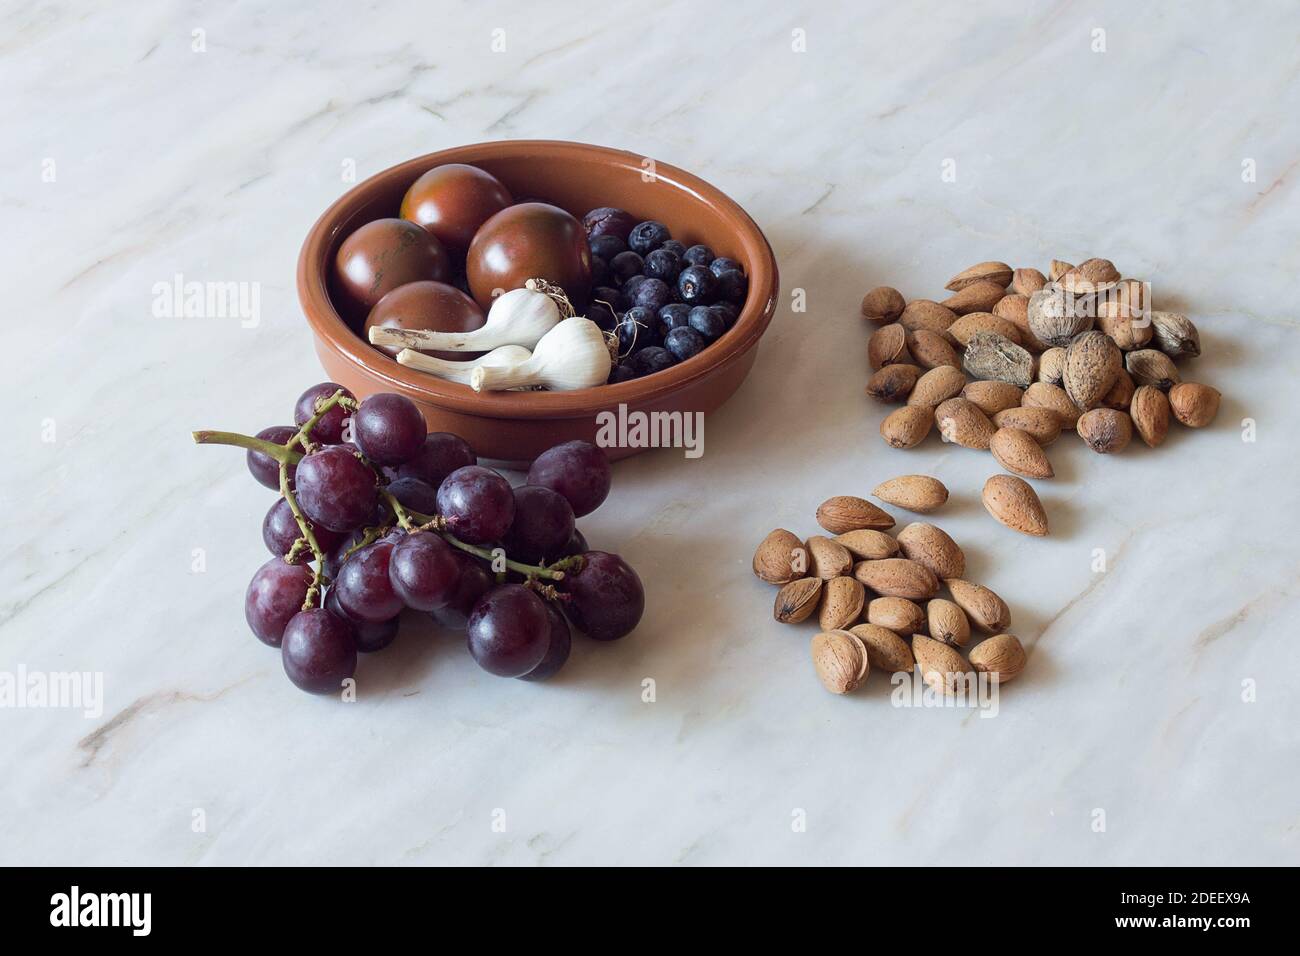 Several handfuls of natural almonds in the shell accompanied by a bunch of black grapes and a rustic clay bowl with blueberries, garlic, and tomatoes. Stock Photo